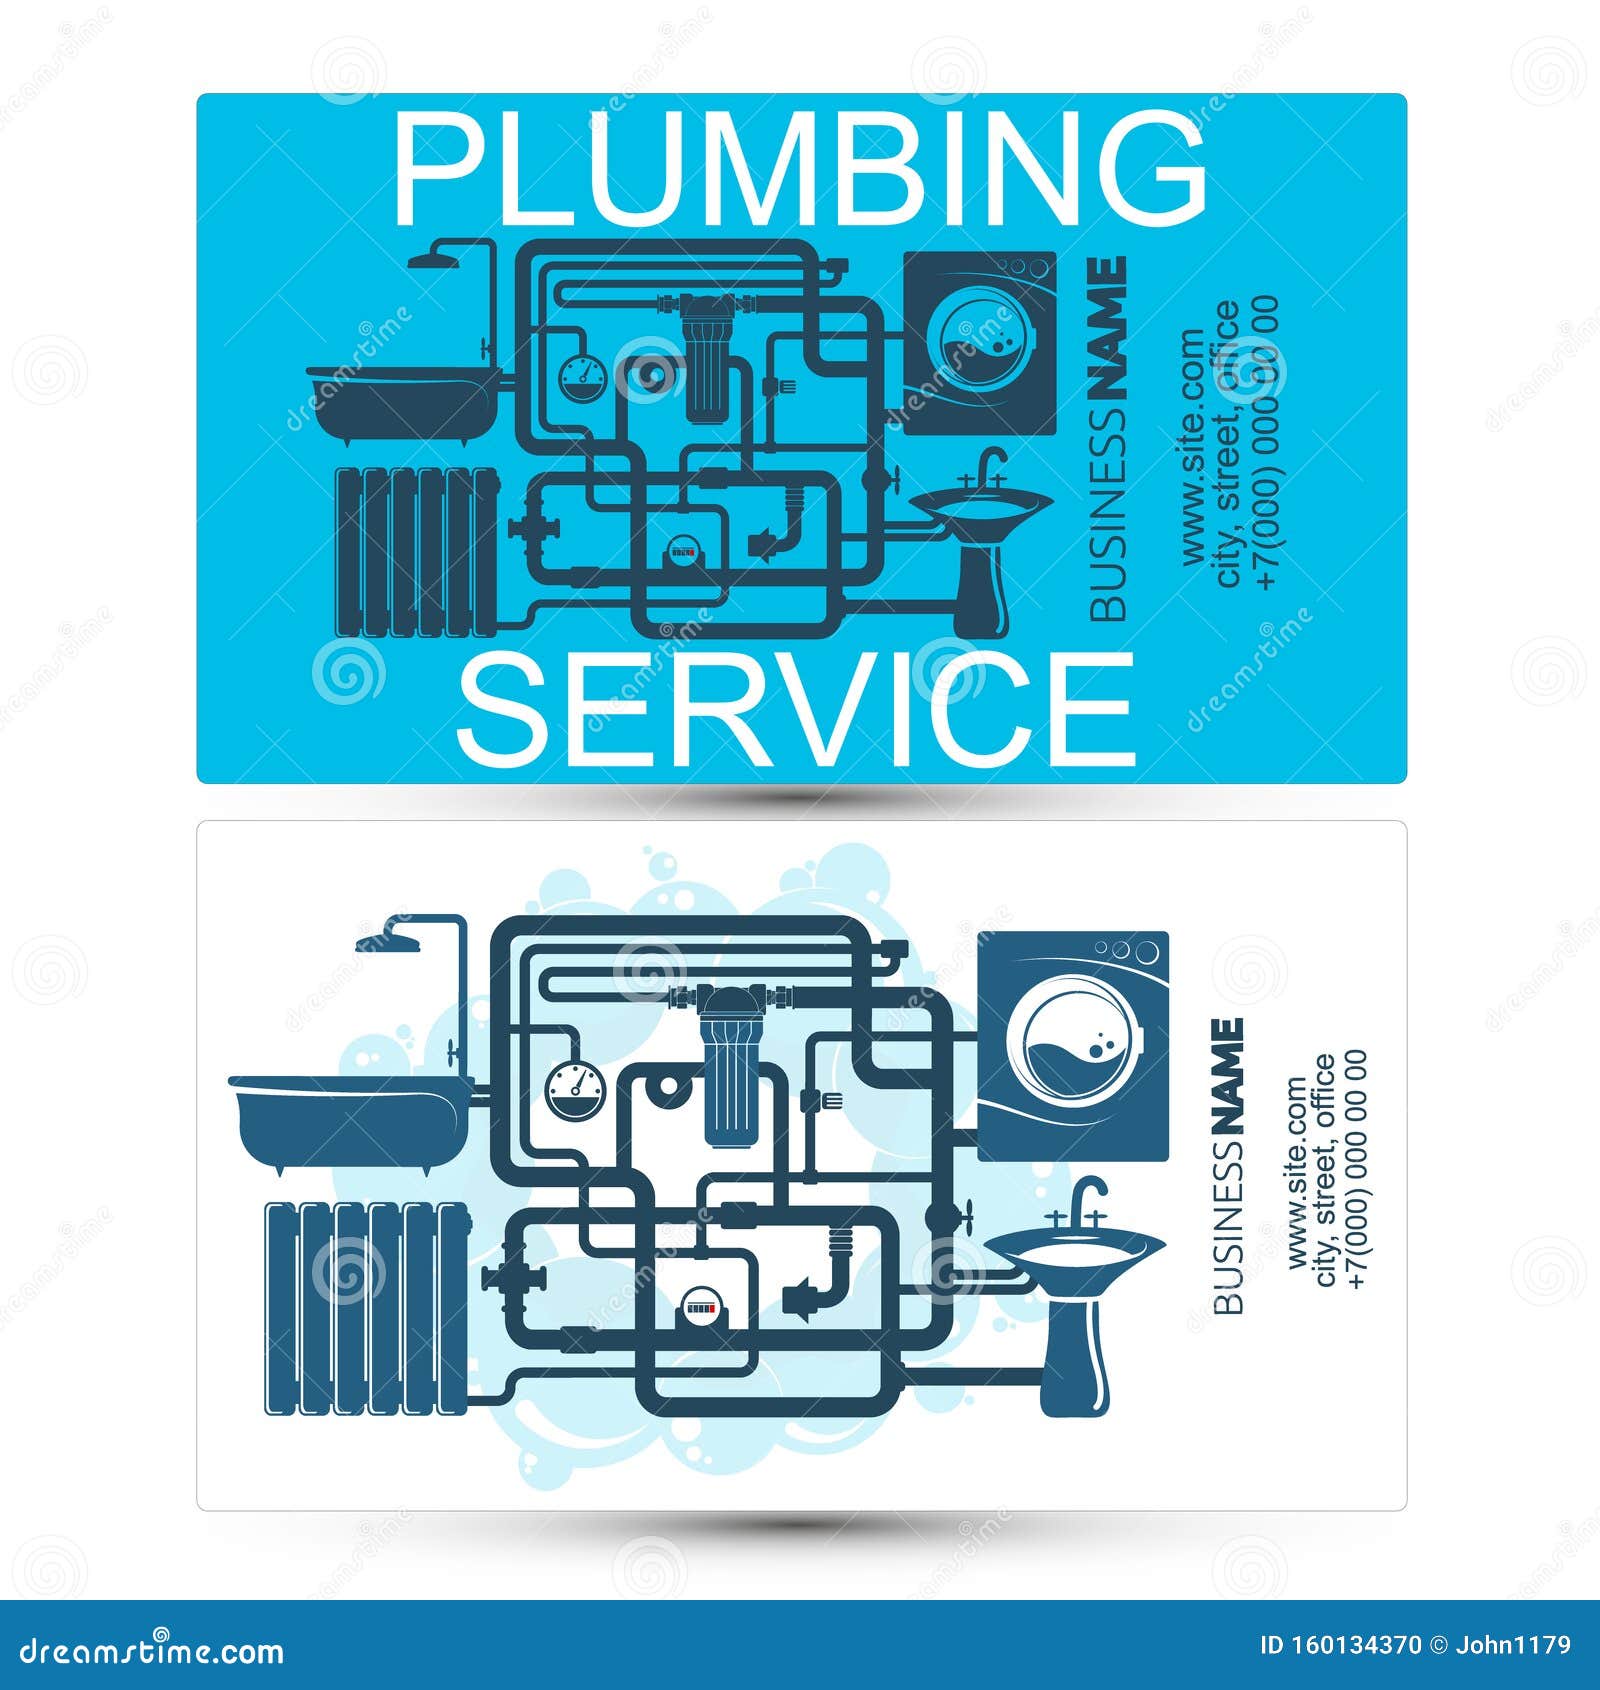 Commercial Plumbing Facility Management Services - Chicago, IL